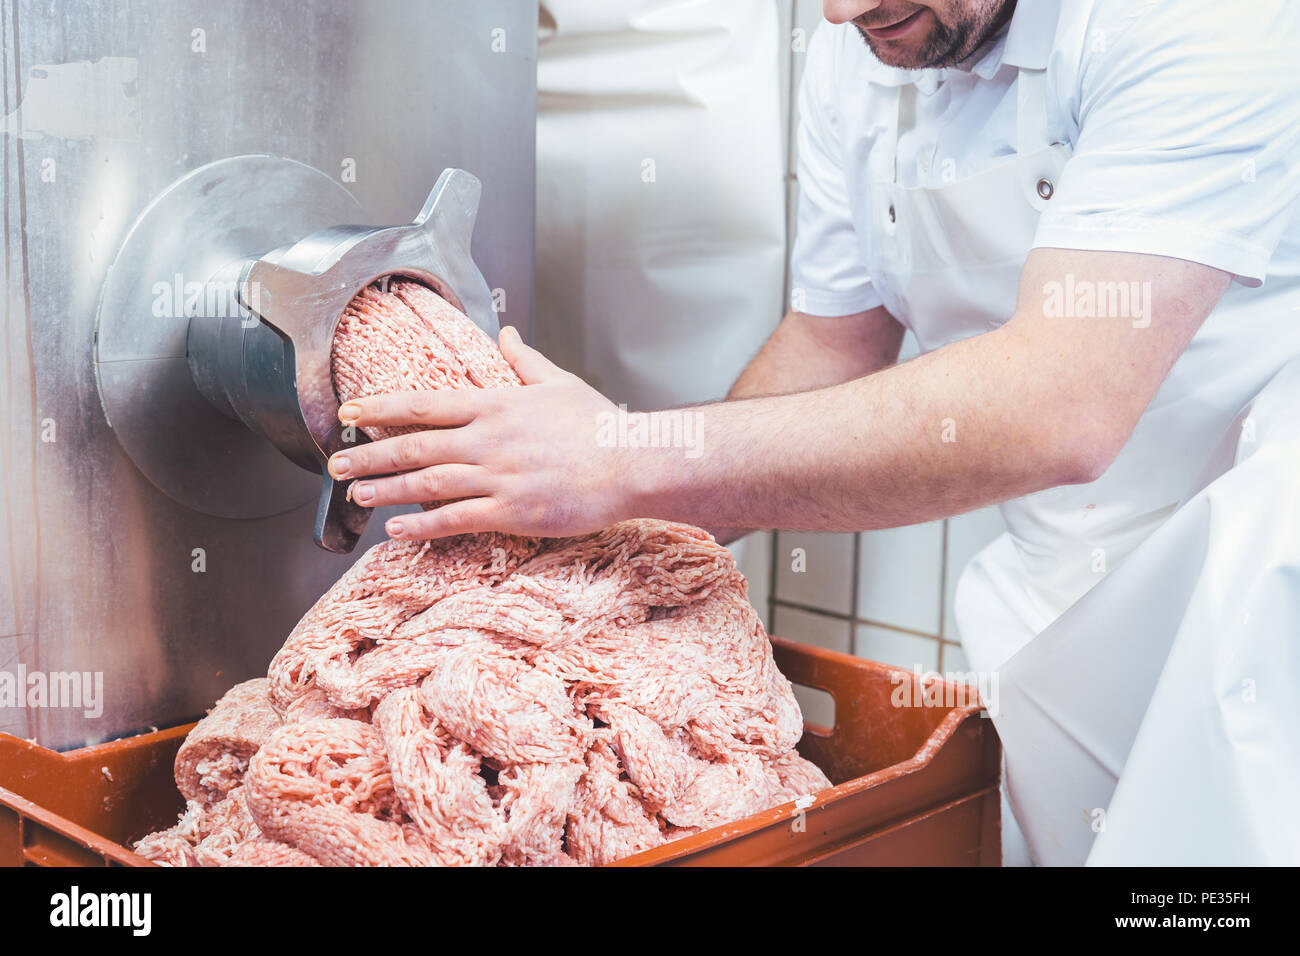 Minced meat flowing out of grinder in butchery Stock Photo